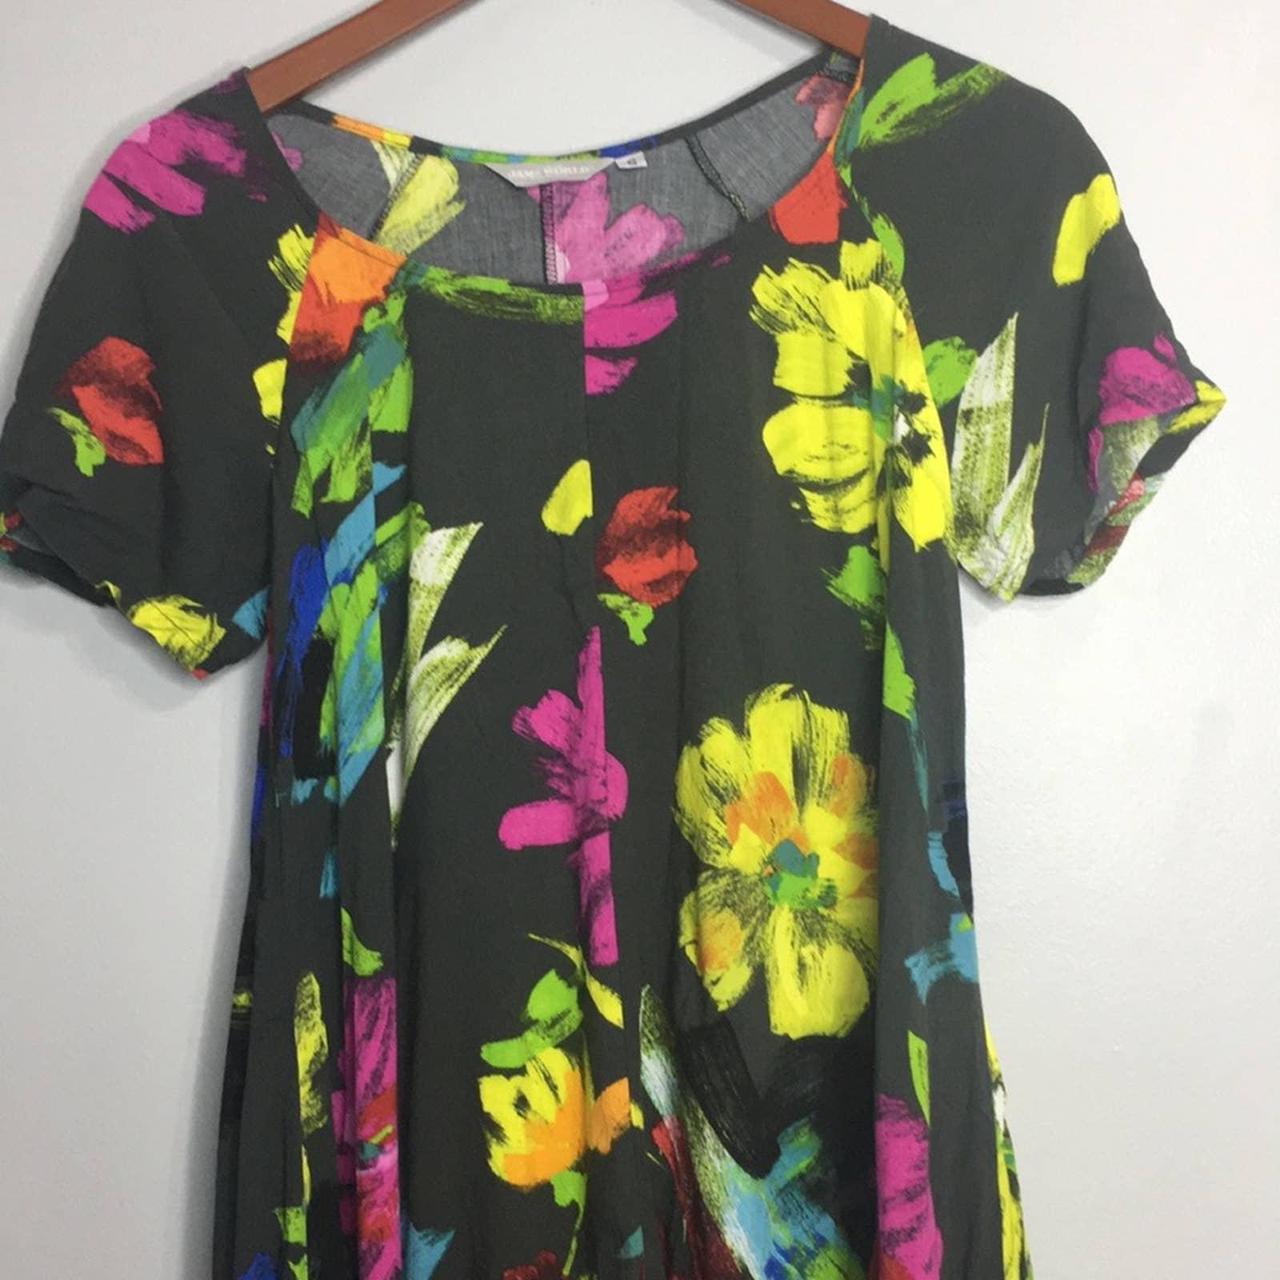 Product Image 2 - Jams World colorful floral dress